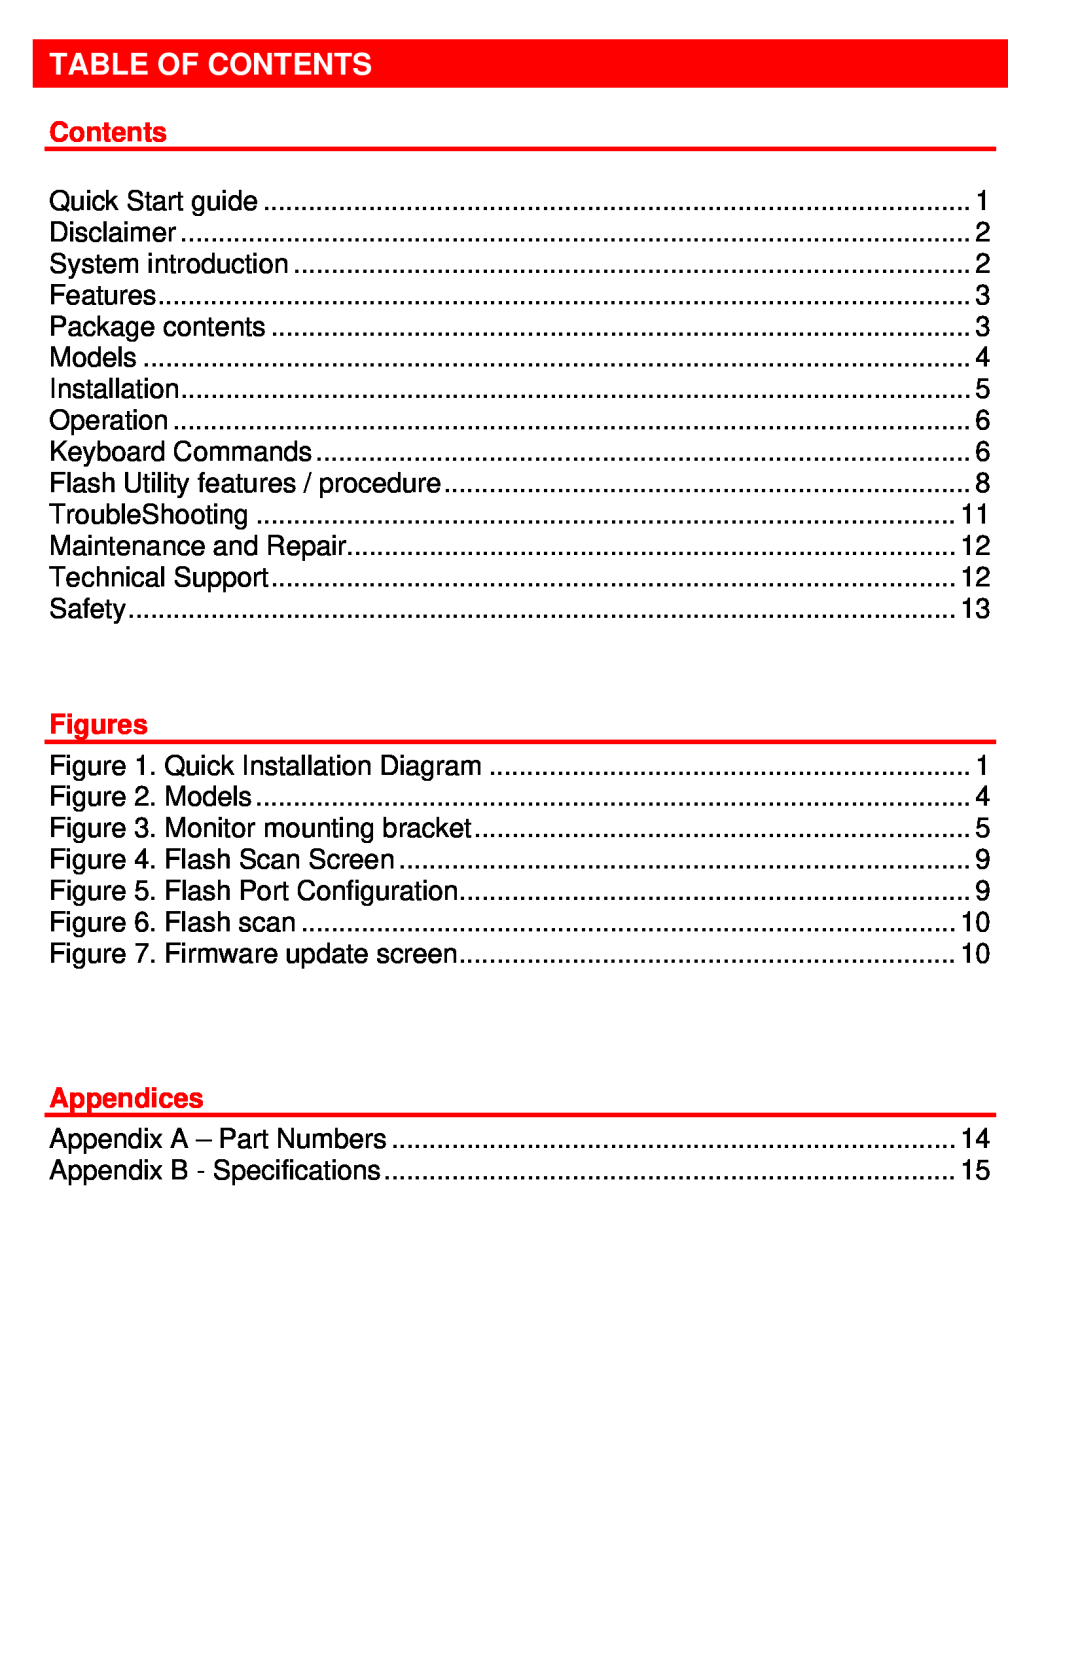 Rose electronic CATx manual Table Of Contents, Figures, Appendices 